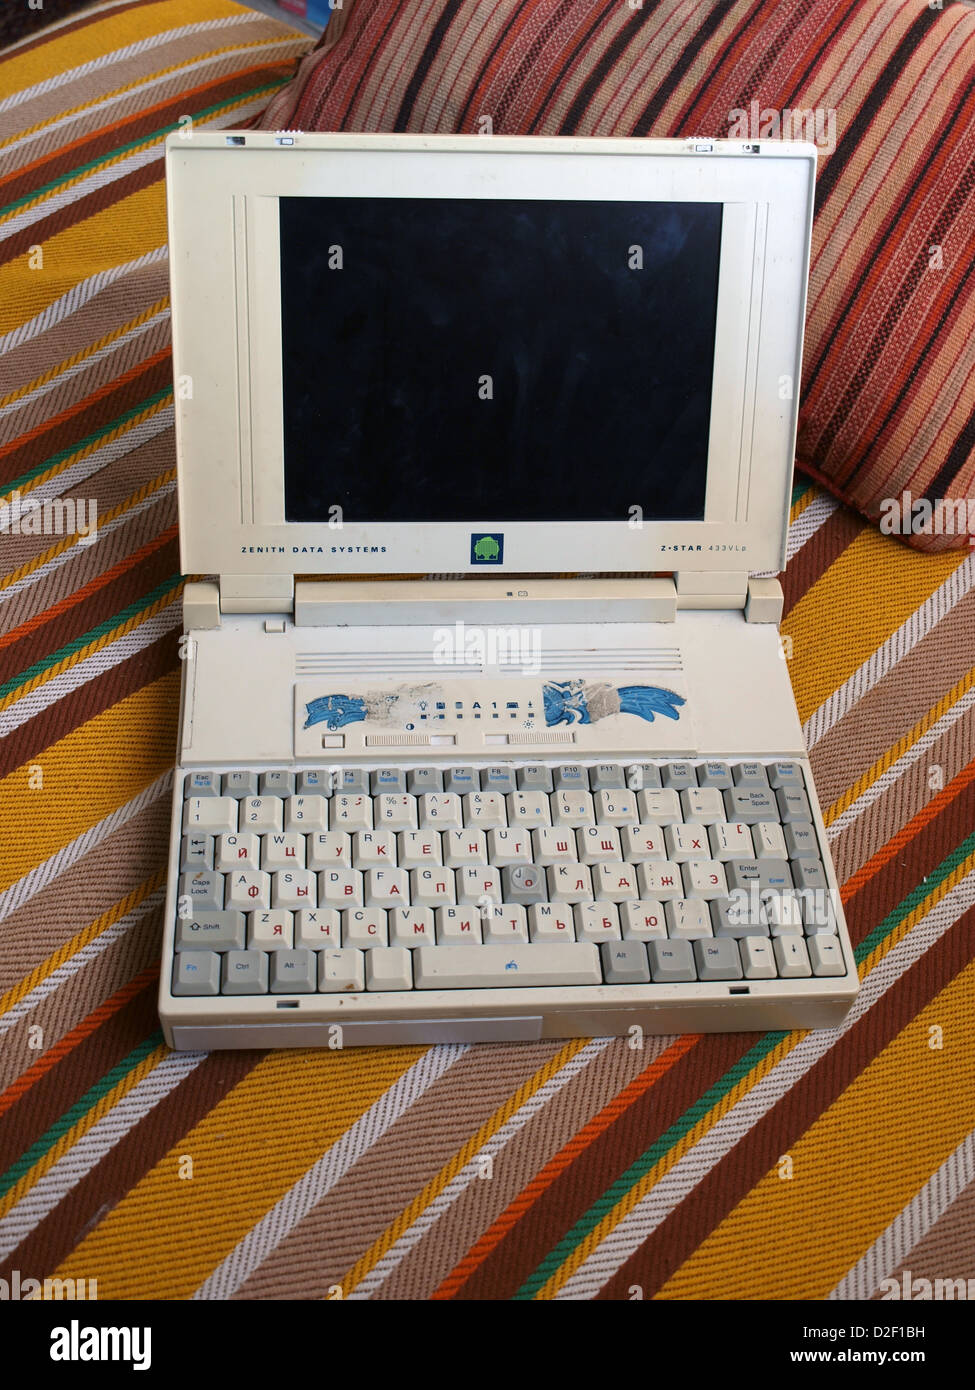 Old retro laptop personal computer Z-Star 433VLp, made by Zenith Data Systems Stock Photo